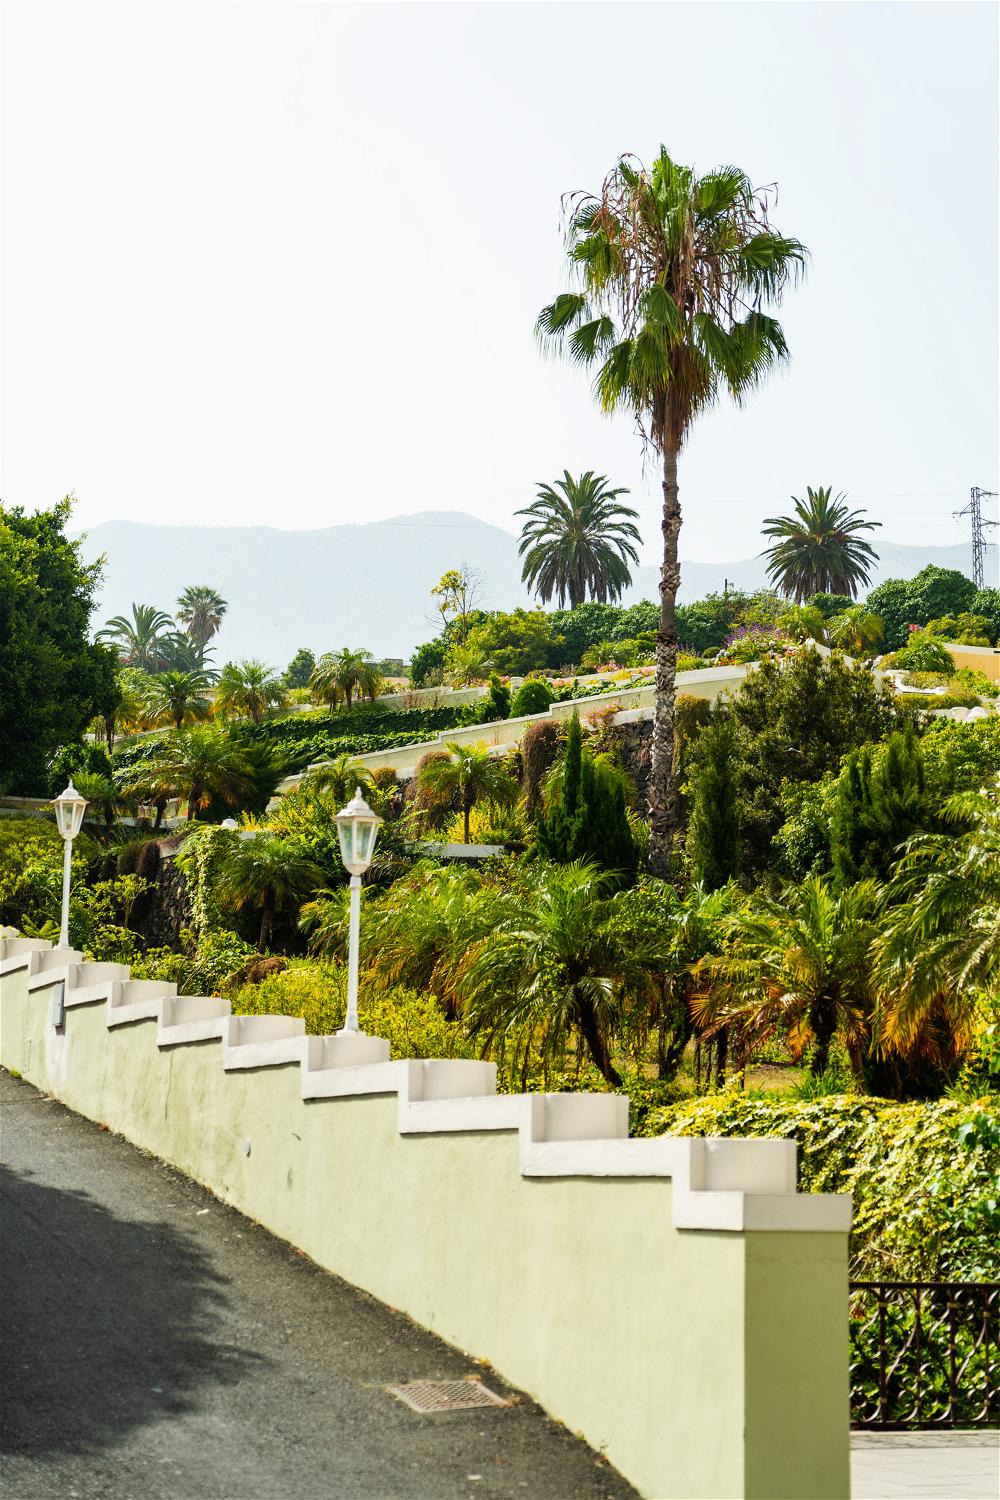 Palm trees and gardens line a walkway